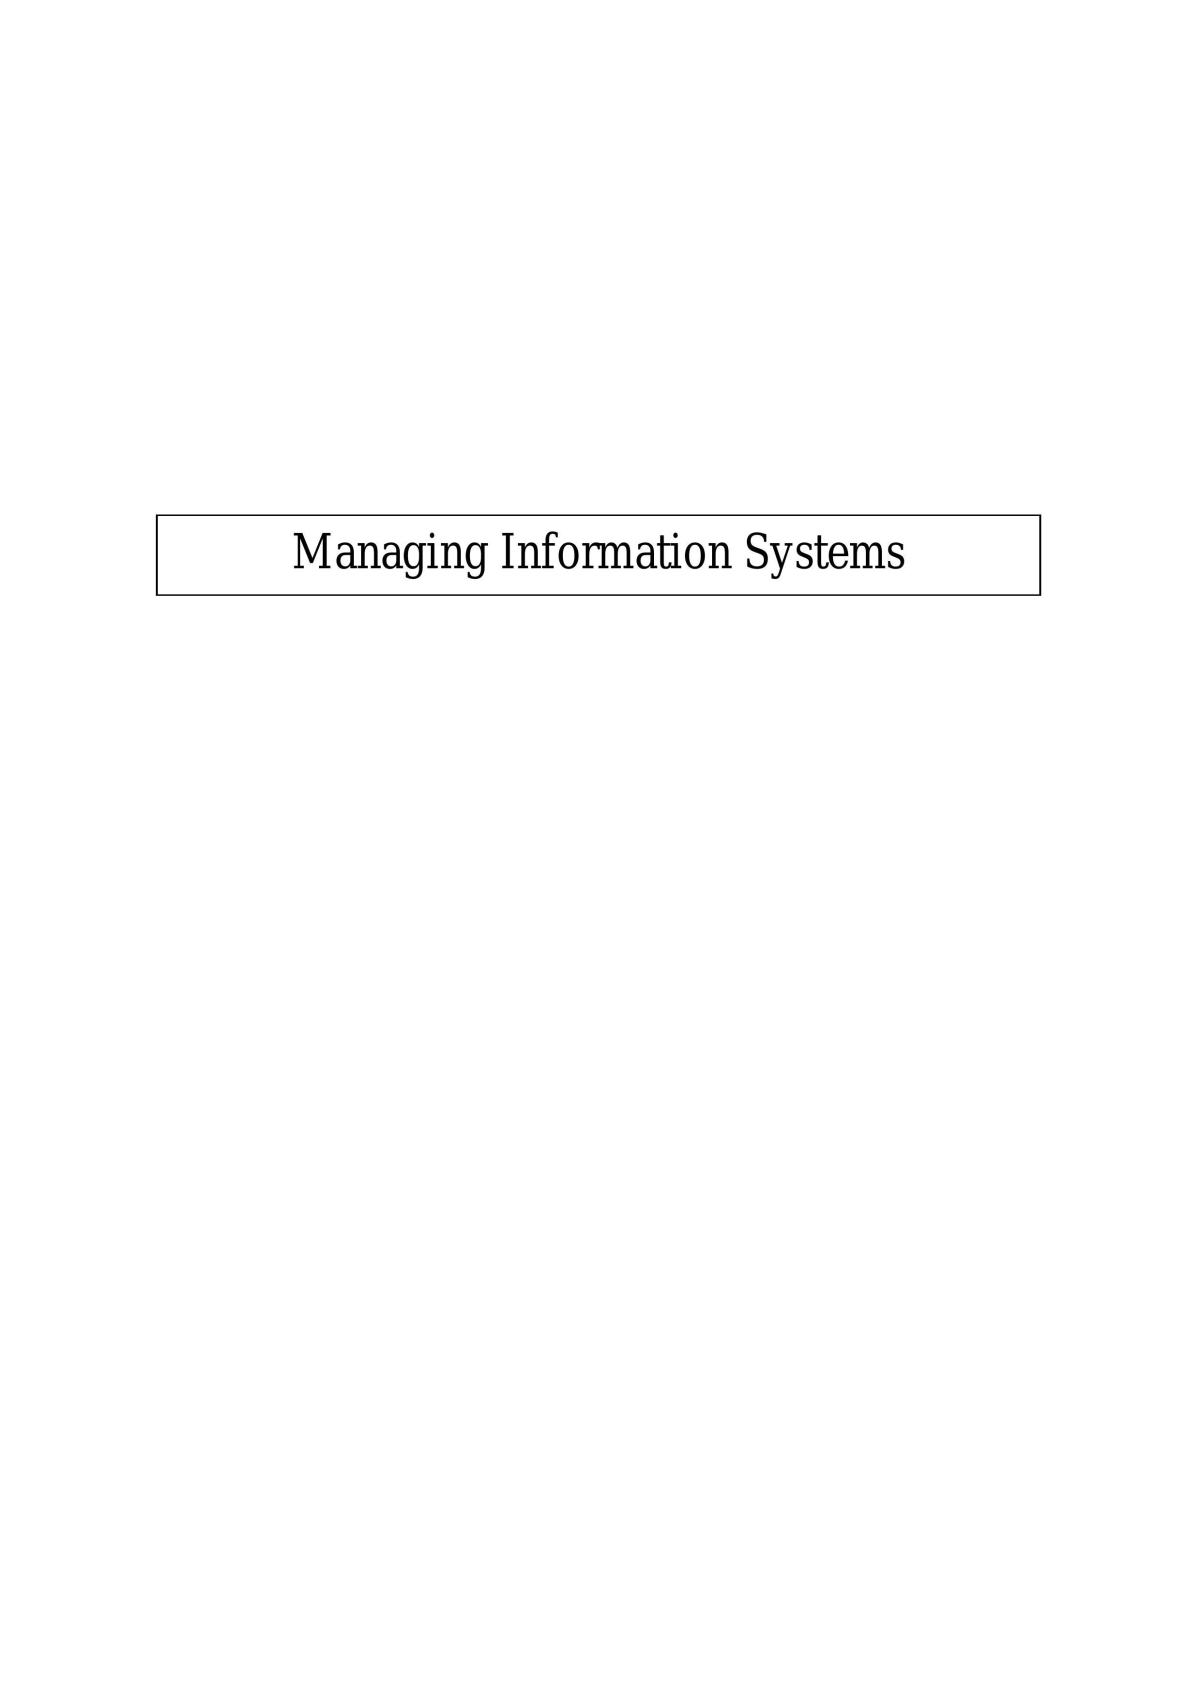 Managing information systems | AACS3763 - Managing Information Systems ...